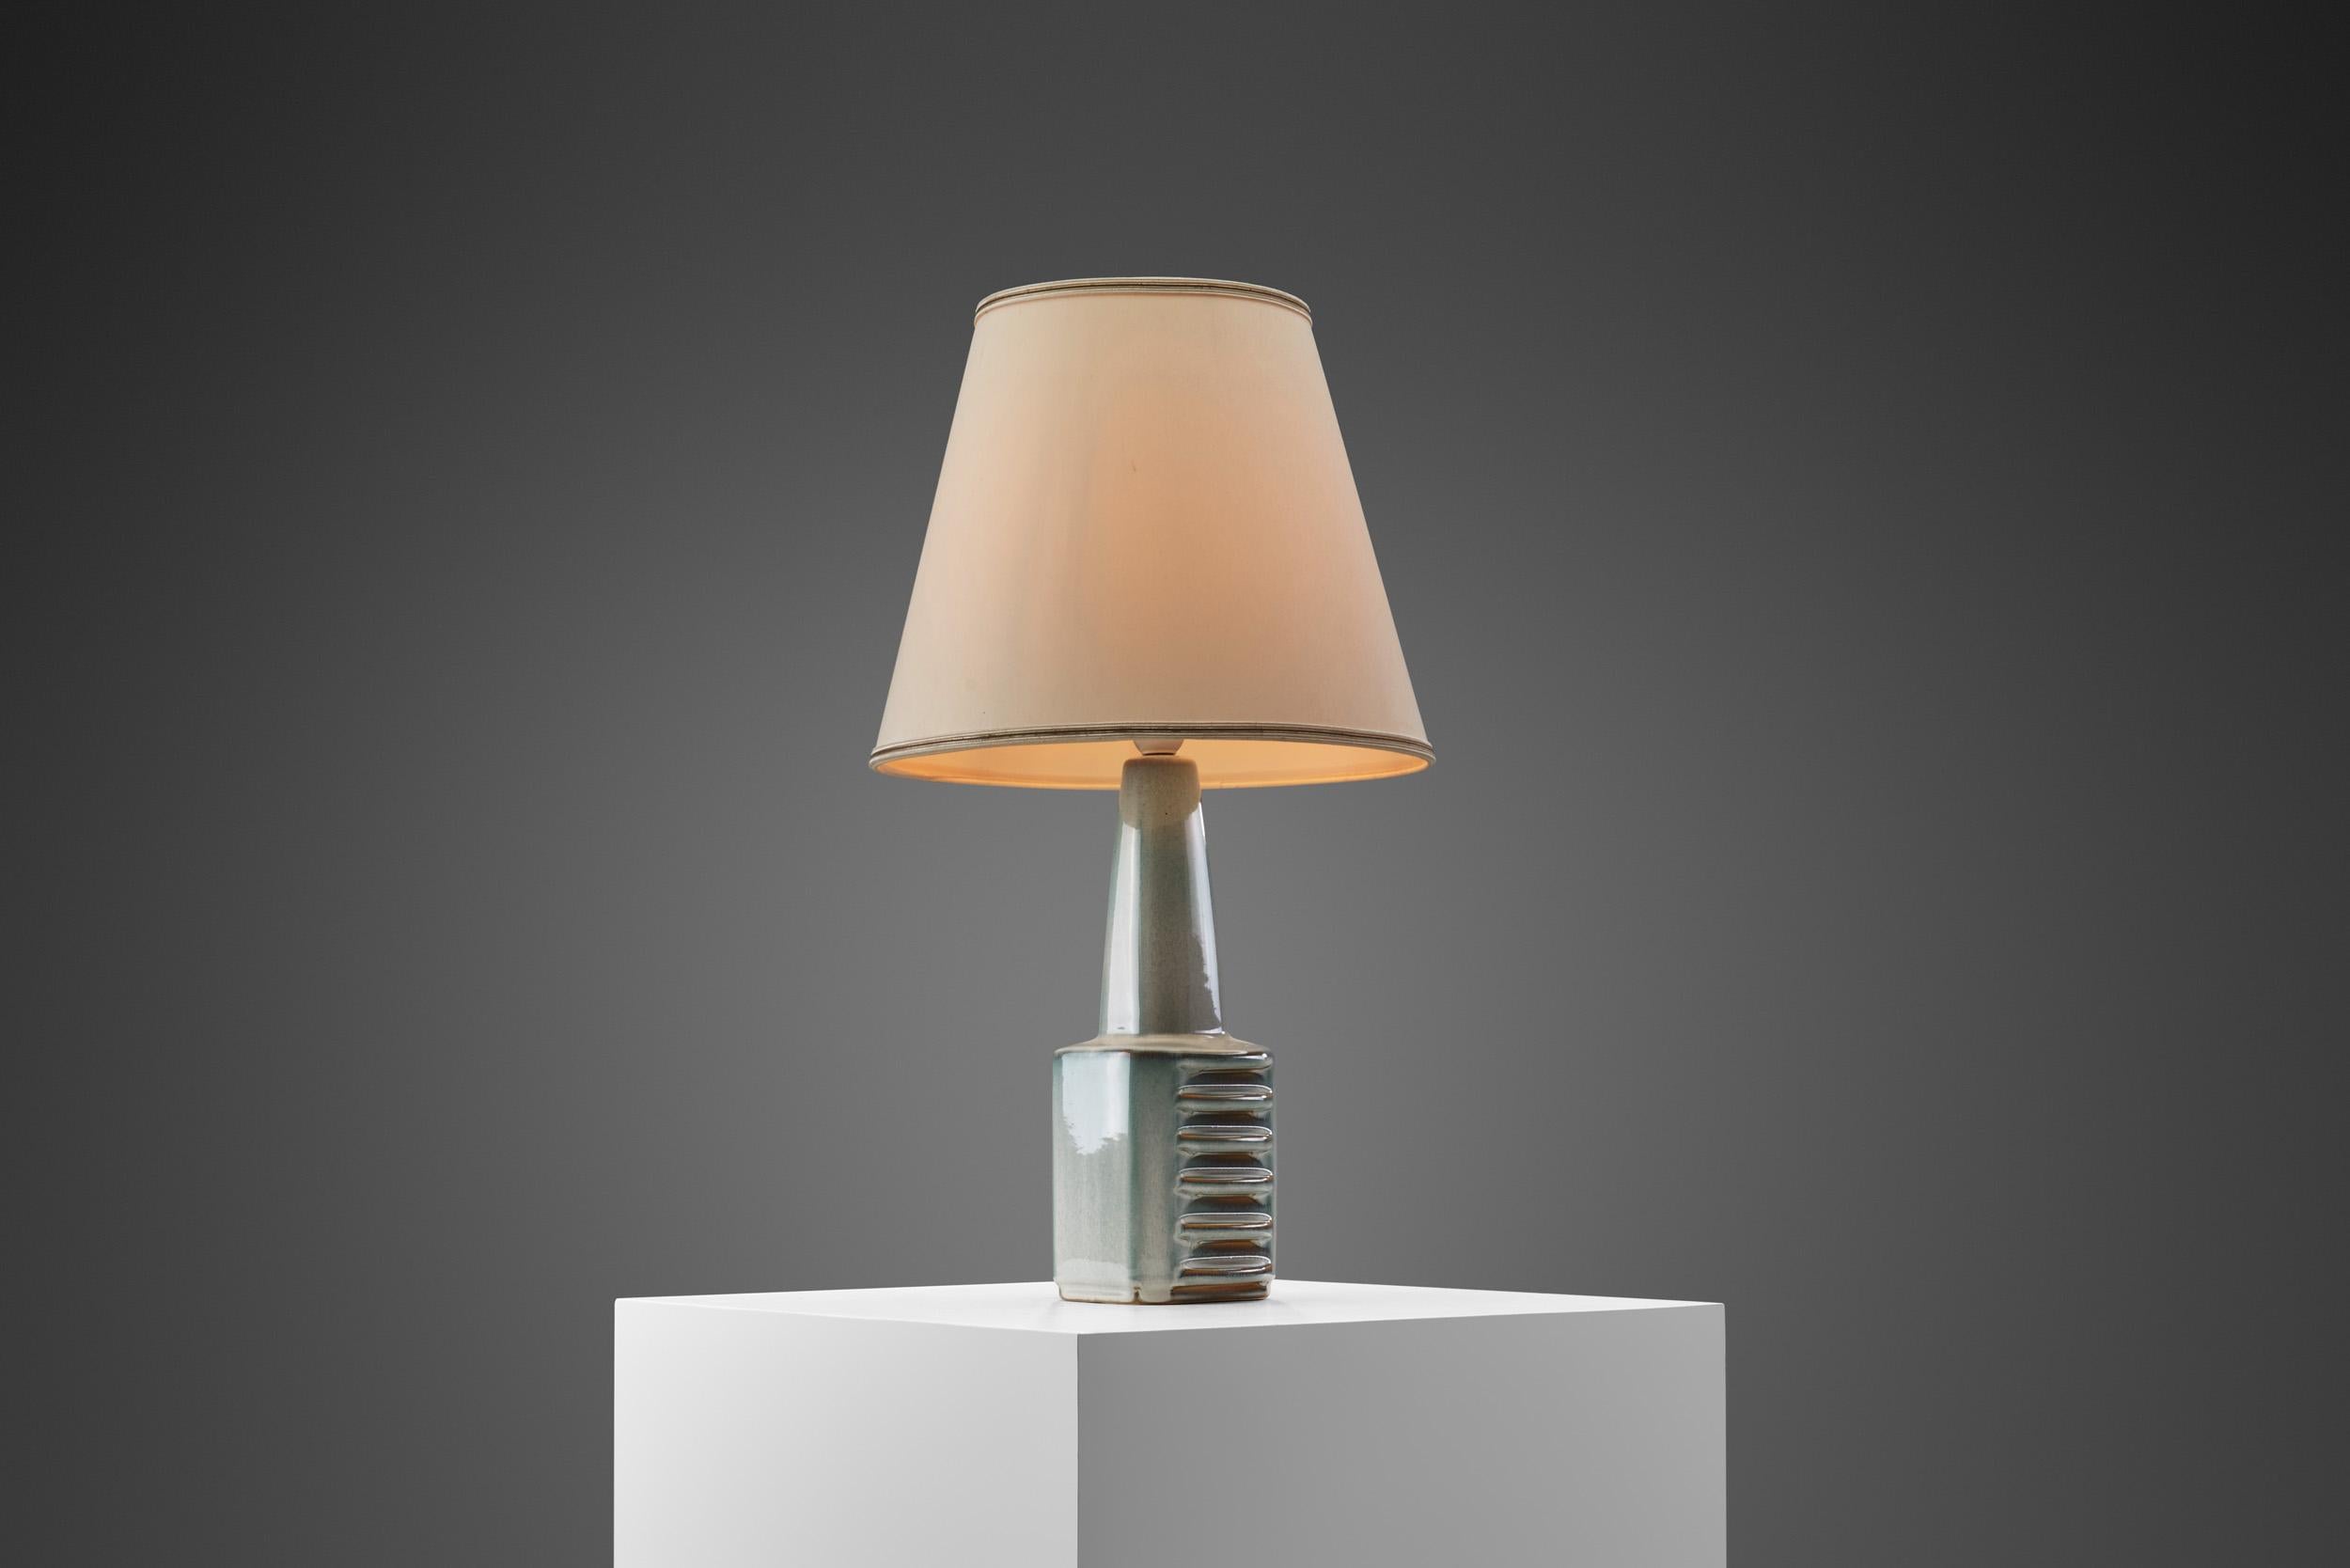 This handmade 1960s table lamp was designed by the brilliant Danish artist, Einar Johansen, and produced by Søholm Stentøj (Søholm stoneware). The manufactory was one of the oldest and most revered names in Danish ceramics. It was founded in Rønne